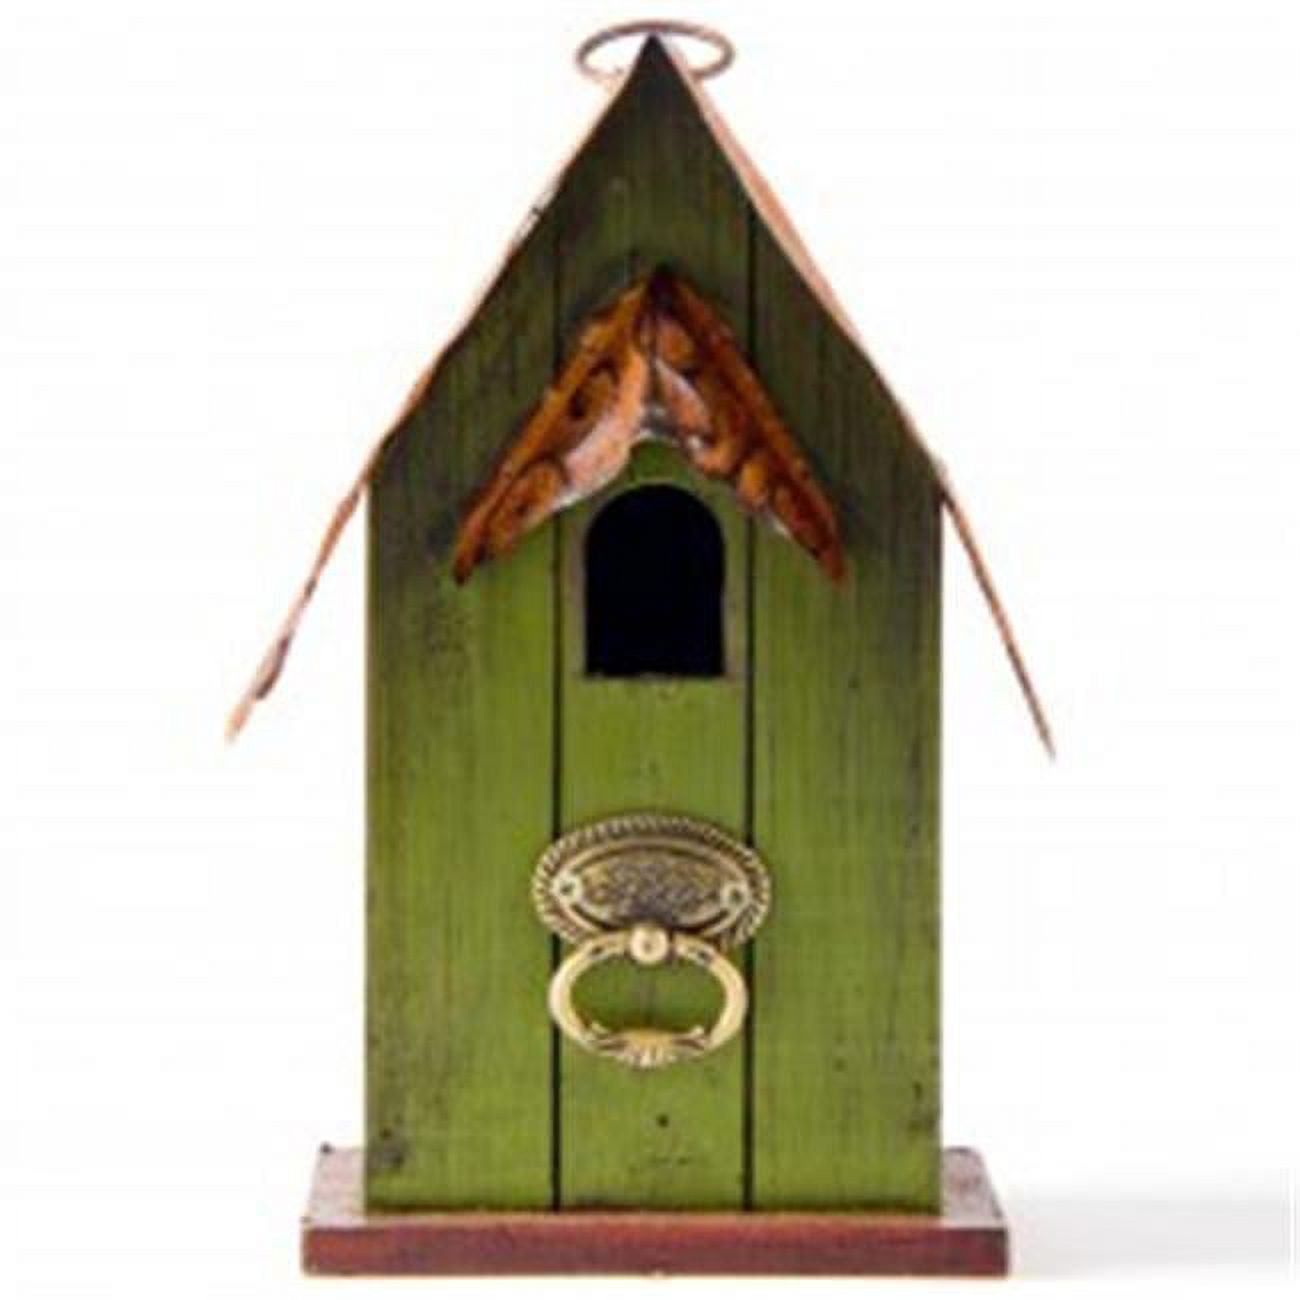 Glitzhome 4.09 in. Distressed Wooden Birdhouse Wall Hanging - image 1 of 5